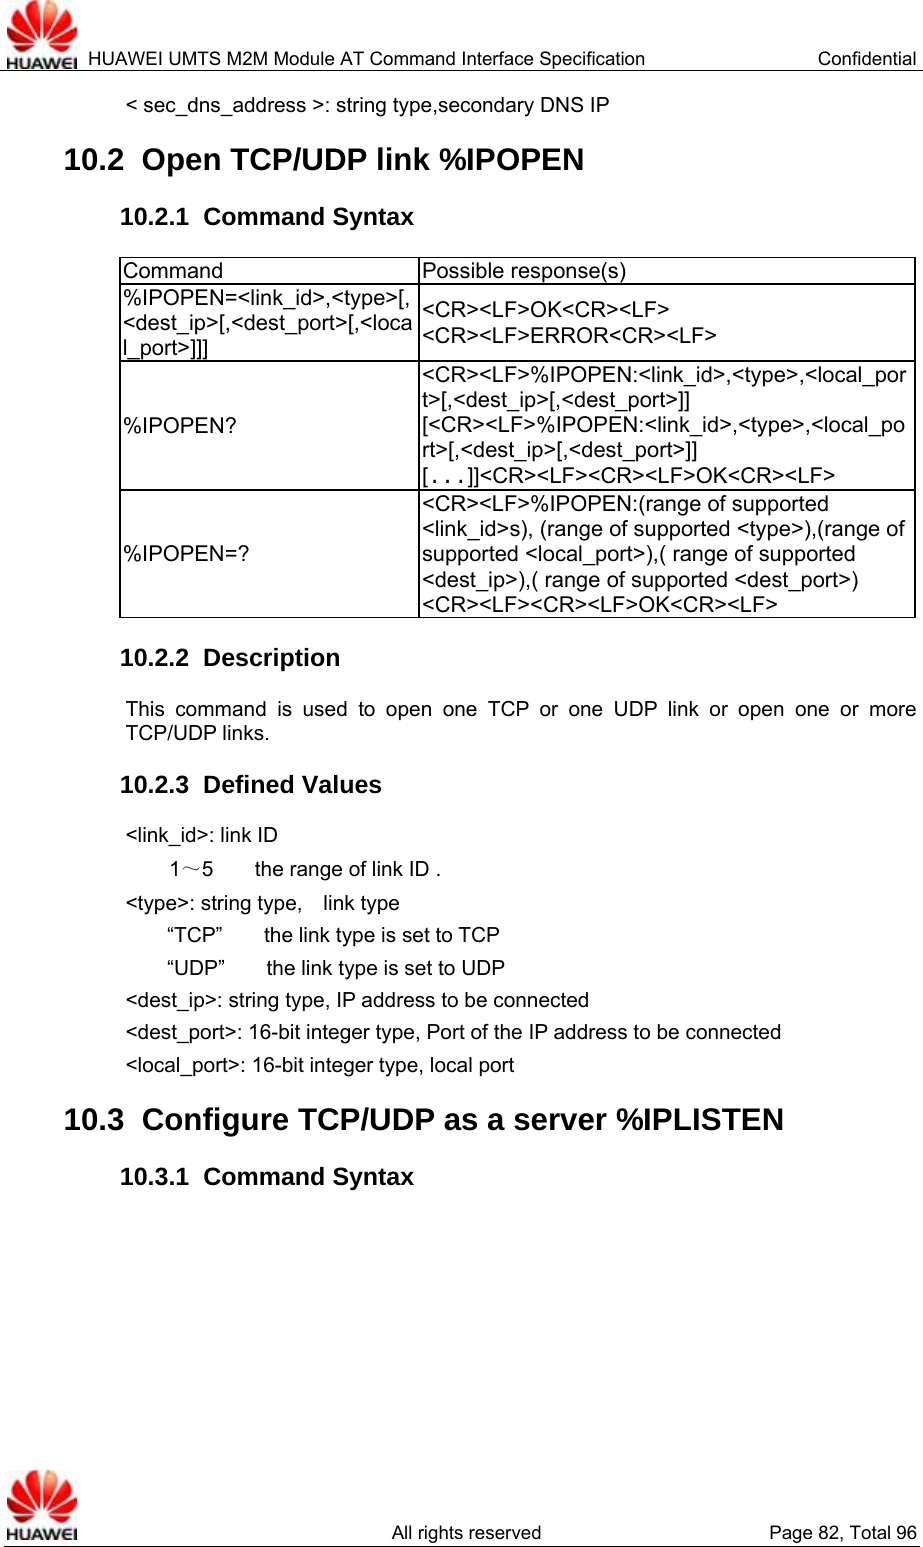  HUAWEI UMTS M2M Module AT Command Interface Specification  Confidential   All rights reserved  Page 82, Total 96 &lt; sec_dns_address &gt;: string type,secondary DNS IP 10.2  Open TCP/UDP link %IPOPEN 10.2.1  Command Syntax Command Possible response(s) %IPOPEN=&lt;link_id&gt;,&lt;type&gt;[,&lt;dest_ip&gt;[,&lt;dest_port&gt;[,&lt;local_port&gt;]]] &lt;CR&gt;&lt;LF&gt;OK&lt;CR&gt;&lt;LF&gt; &lt;CR&gt;&lt;LF&gt;ERROR&lt;CR&gt;&lt;LF&gt; %IPOPEN? &lt;CR&gt;&lt;LF&gt;%IPOPEN:&lt;link_id&gt;,&lt;type&gt;,&lt;local_port&gt;[,&lt;dest_ip&gt;[,&lt;dest_port&gt;]] [&lt;CR&gt;&lt;LF&gt;%IPOPEN:&lt;link_id&gt;,&lt;type&gt;,&lt;local_port&gt;[,&lt;dest_ip&gt;[,&lt;dest_port&gt;]] [...]]&lt;CR&gt;&lt;LF&gt;&lt;CR&gt;&lt;LF&gt;OK&lt;CR&gt;&lt;LF&gt; %IPOPEN=? &lt;CR&gt;&lt;LF&gt;%IPOPEN:(range of supported &lt;link_id&gt;s), (range of supported &lt;type&gt;),(range of supported &lt;local_port&gt;),( range of supported &lt;dest_ip&gt;),( range of supported &lt;dest_port&gt;) &lt;CR&gt;&lt;LF&gt;&lt;CR&gt;&lt;LF&gt;OK&lt;CR&gt;&lt;LF&gt; 10.2.2  Description This command is used to open one TCP or one UDP link or open one or more TCP/UDP links. 10.2.3  Defined Values &lt;link_id&gt;: link ID 1～5        the range of link ID . &lt;type&gt;: string type,    link type “TCP”        the link type is set to TCP “UDP”        the link type is set to UDP   &lt;dest_ip&gt;: string type, IP address to be connected &lt;dest_port&gt;: 16-bit integer type, Port of the IP address to be connected &lt;local_port&gt;: 16-bit integer type, local port 10.3  Configure TCP/UDP as a server %IPLISTEN 10.3.1  Command Syntax 